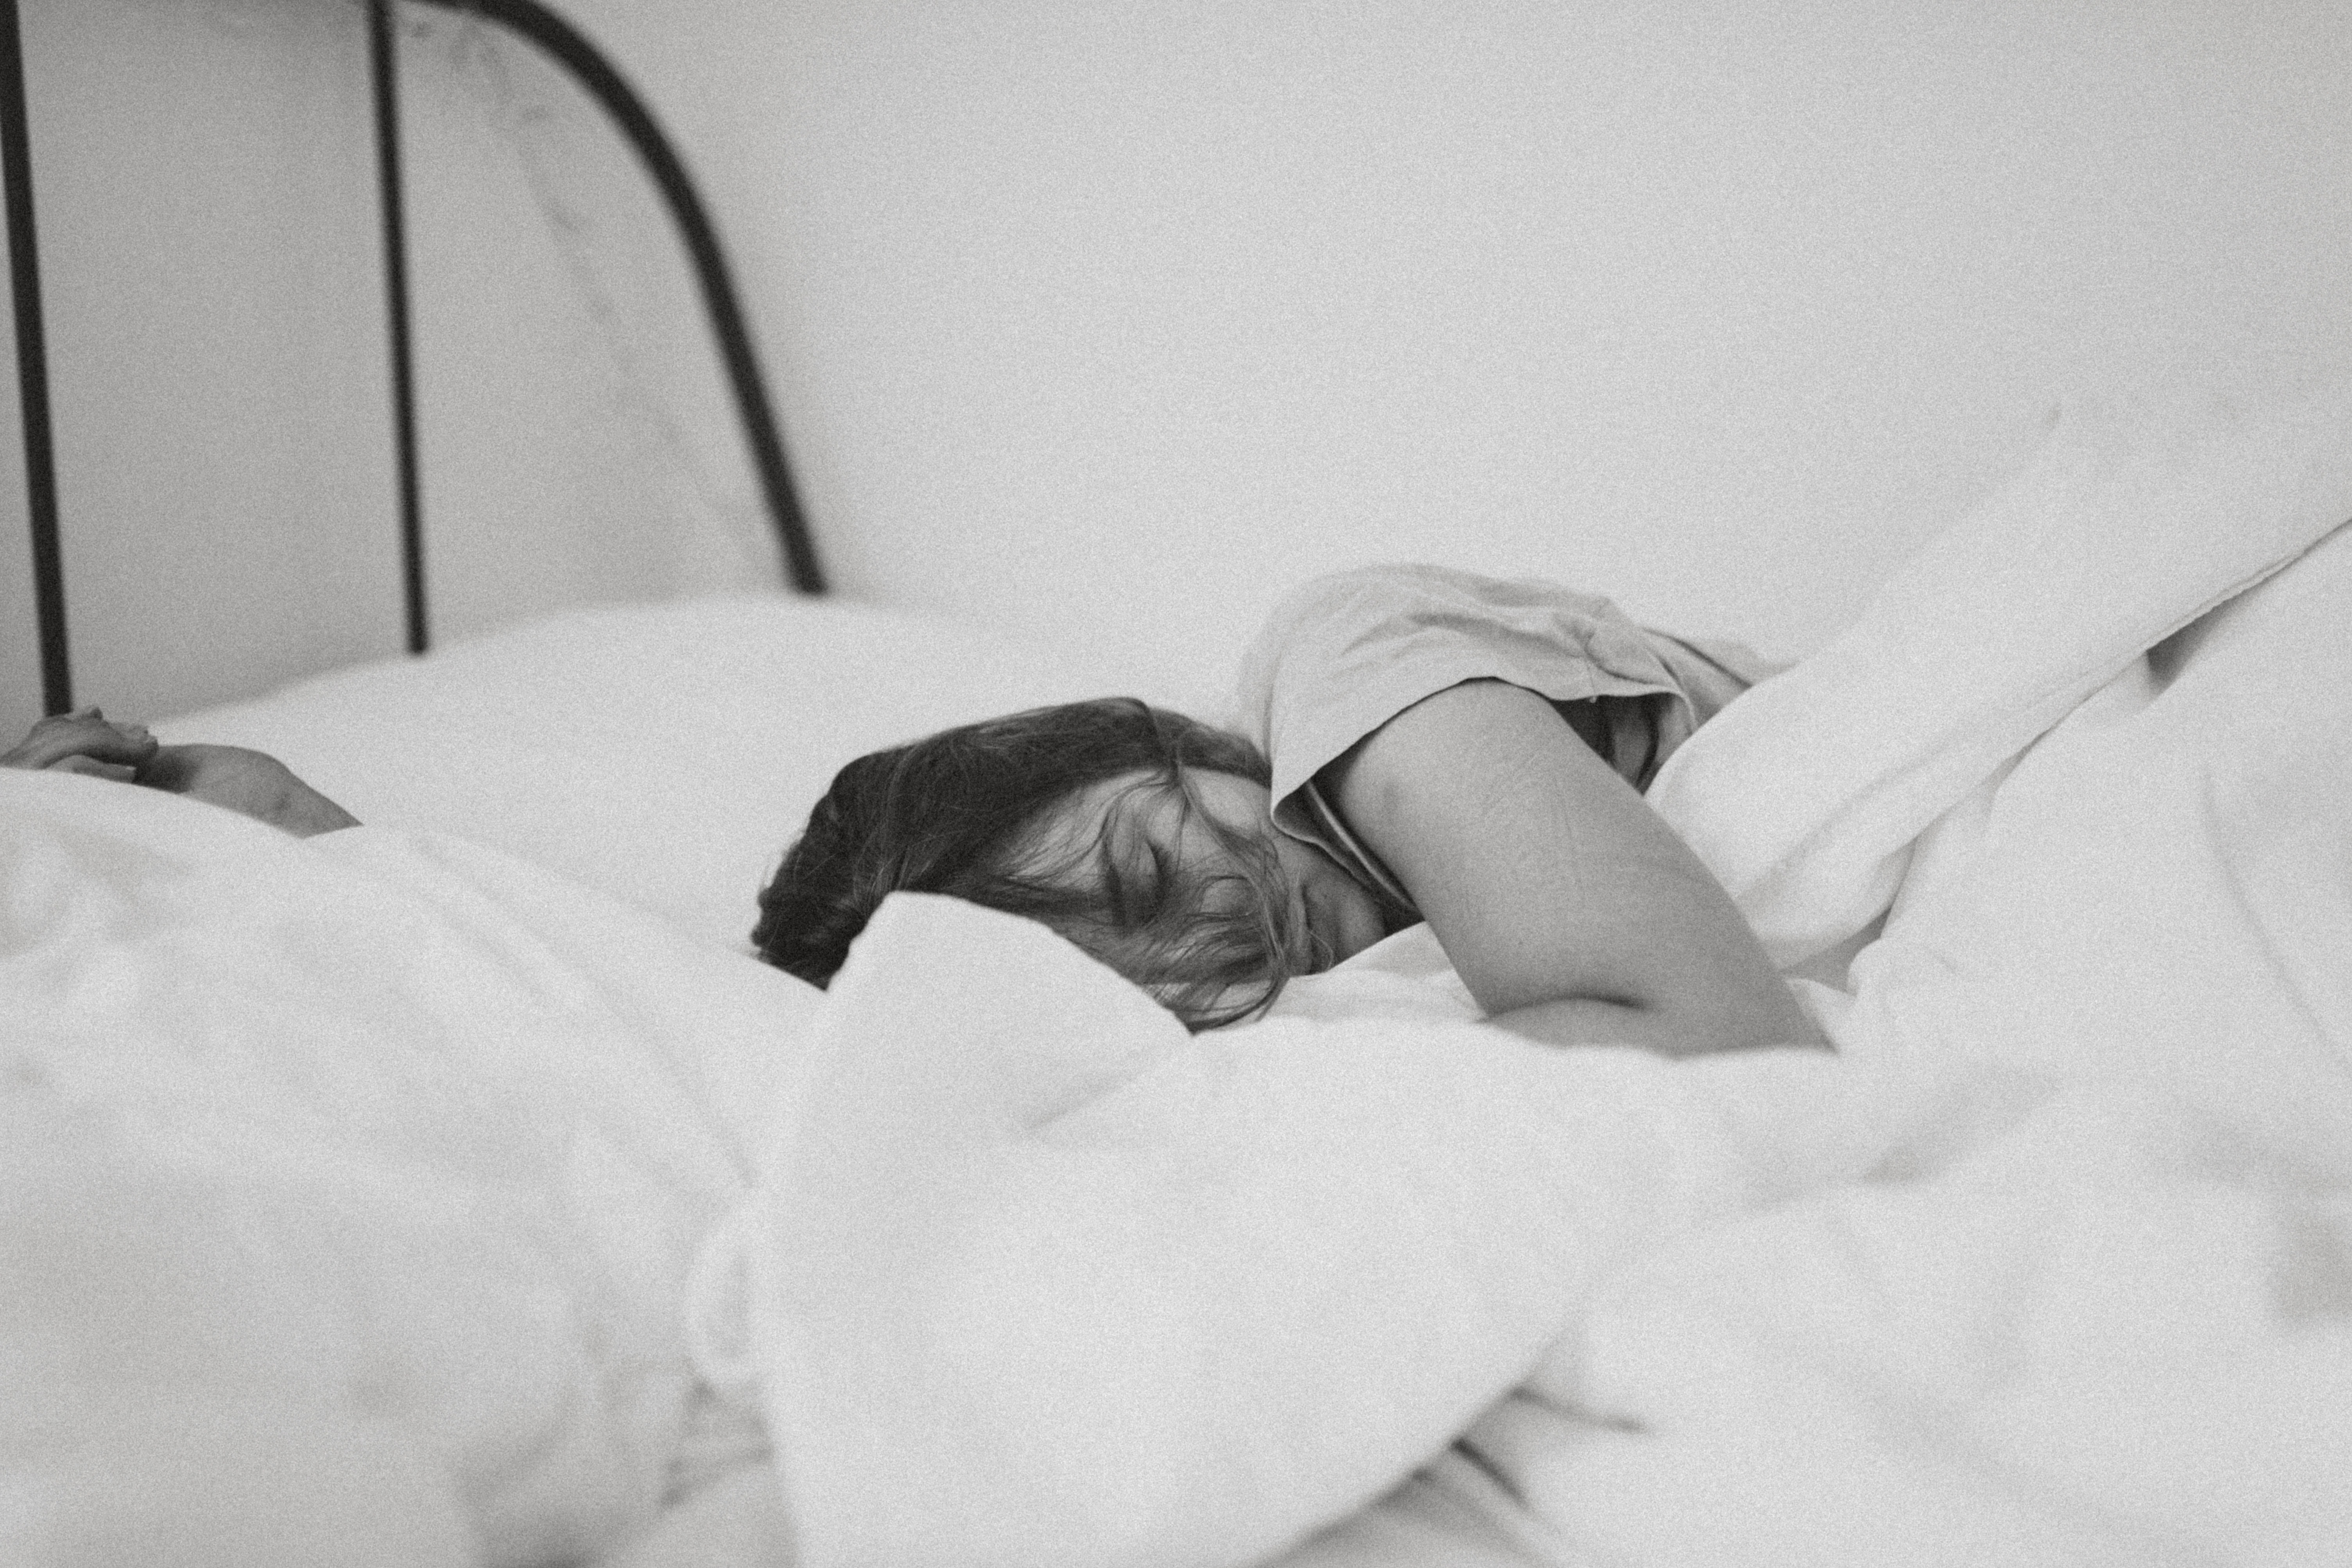 People on Reddit asserted that the depression OP's wife dealt with doesn't count for her laziness. | Source: Unsplash